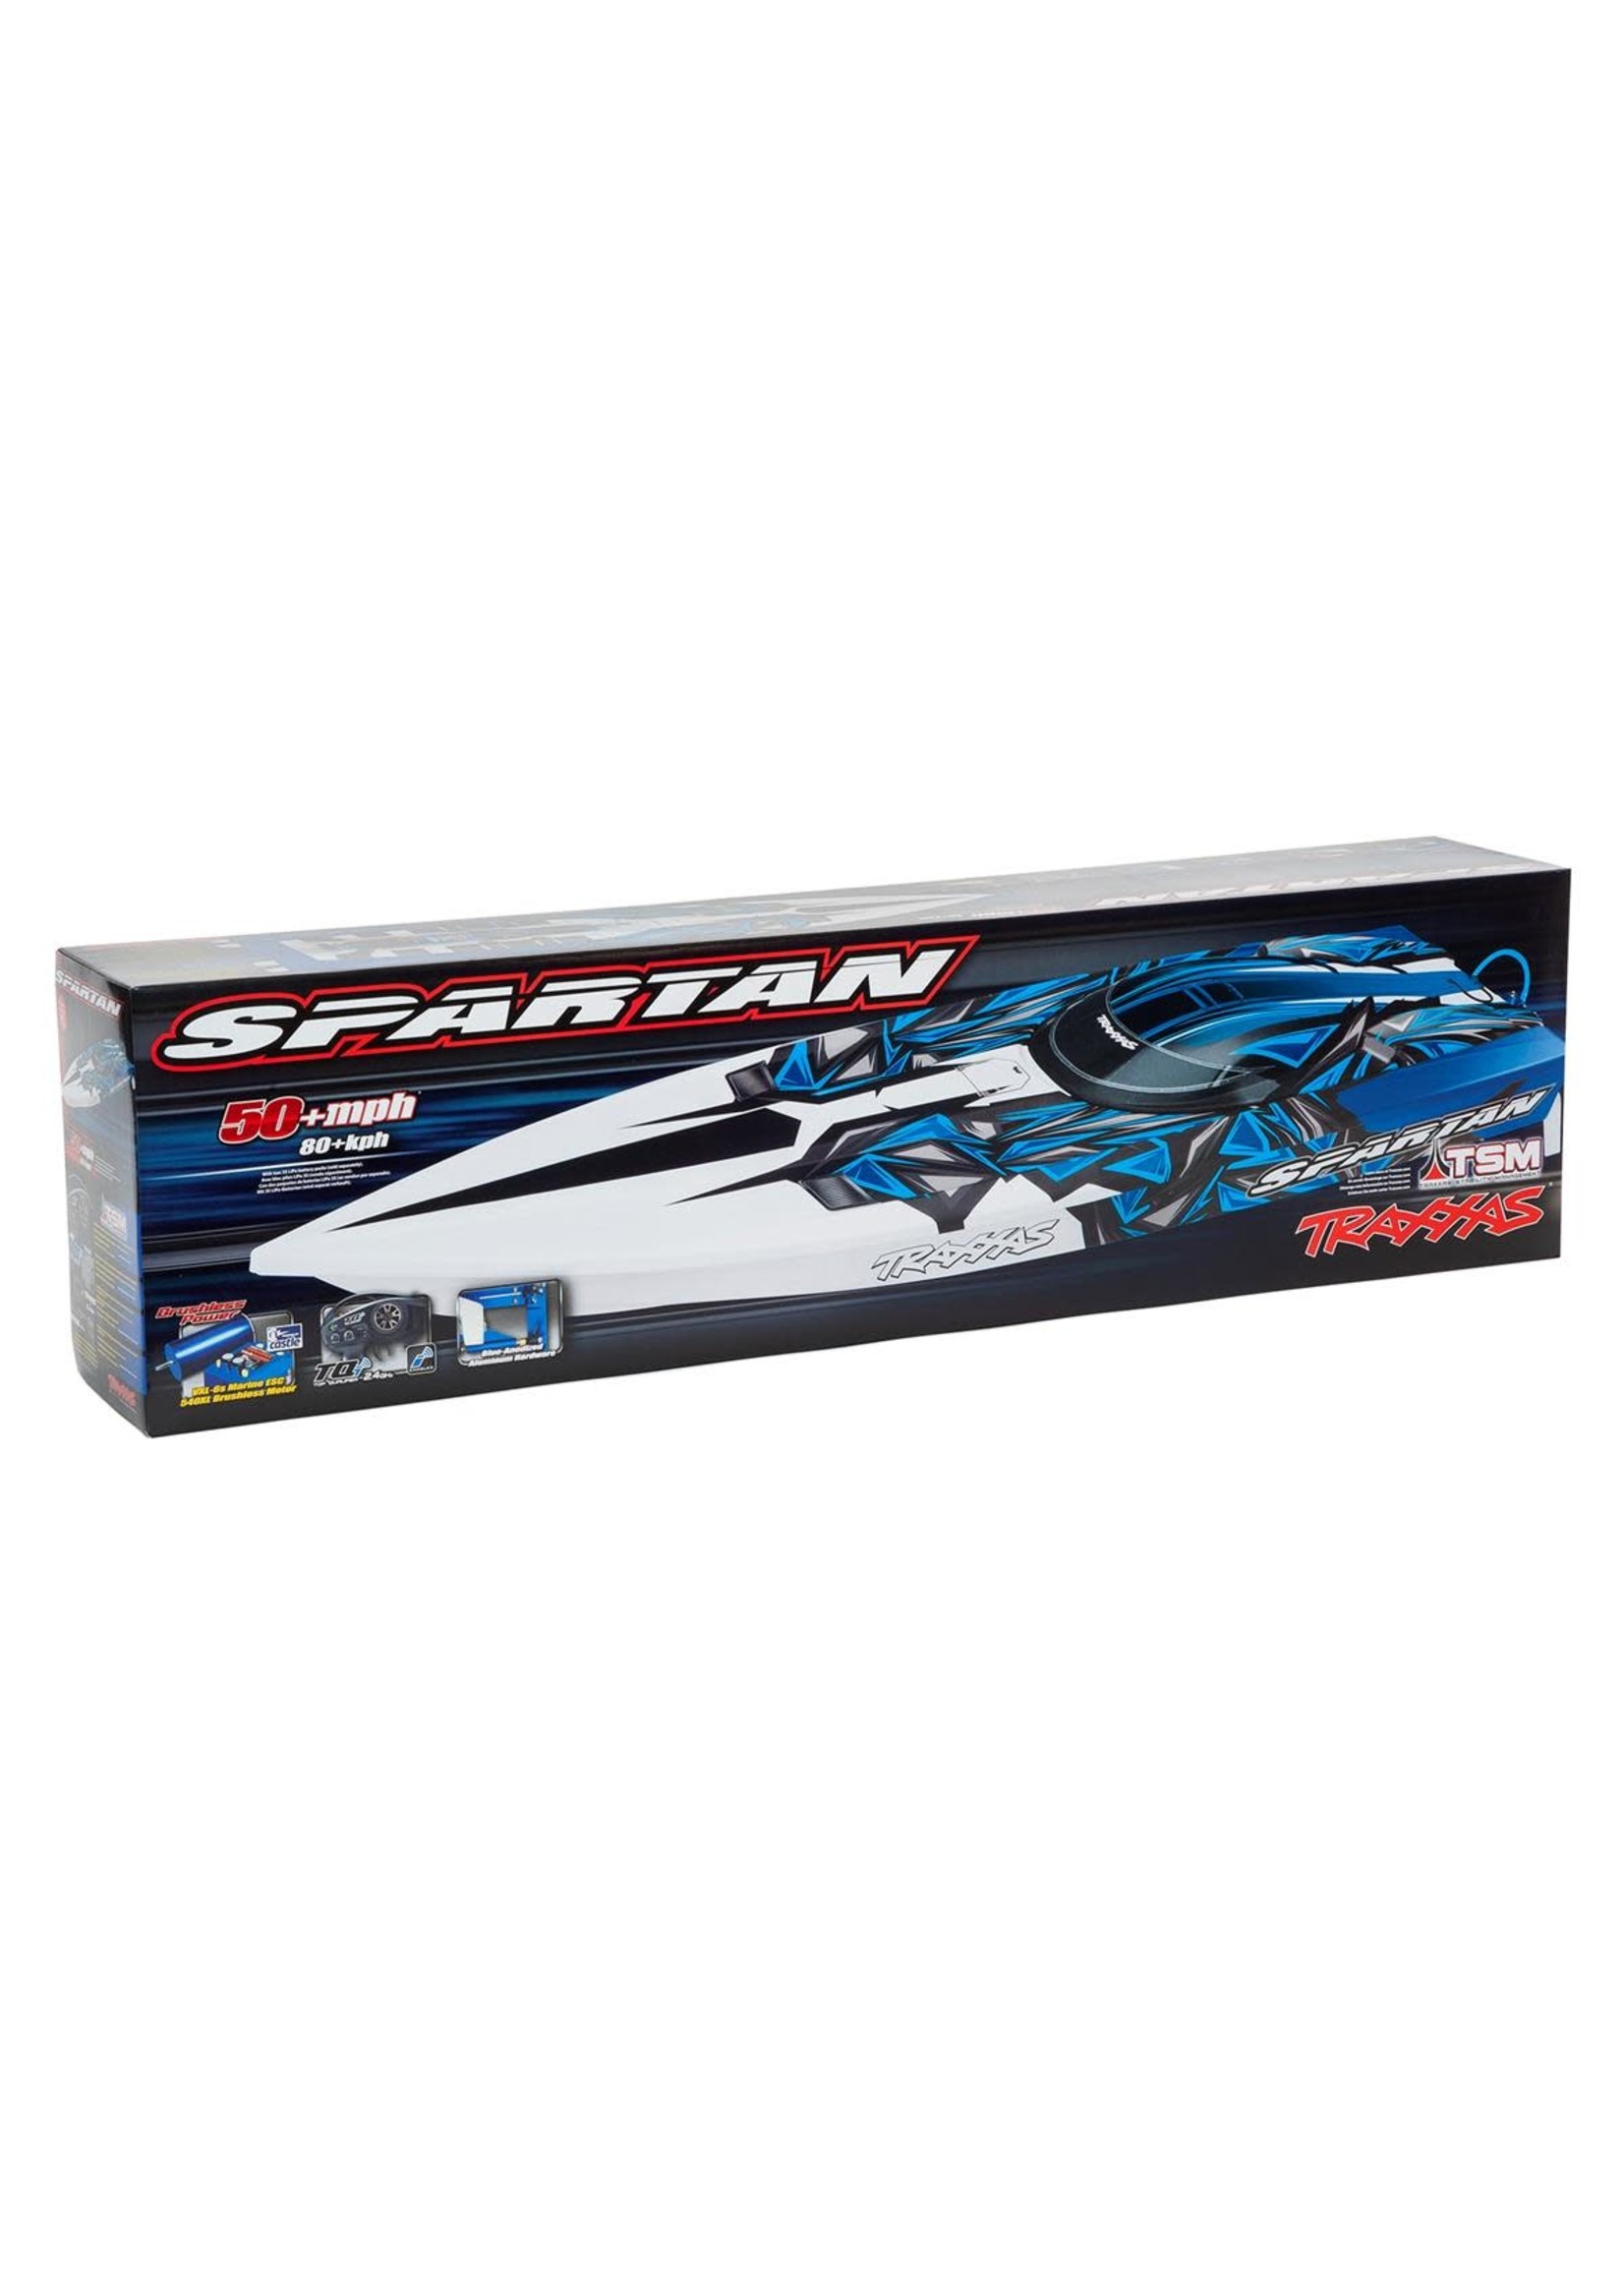 Traxxas 57076-4-ORNG Spartan: Brushless 36' Race Boat with TQi Traxxas Link  Enabled 2.4GHz Radio System & Traxxas Stability Management (TSM)